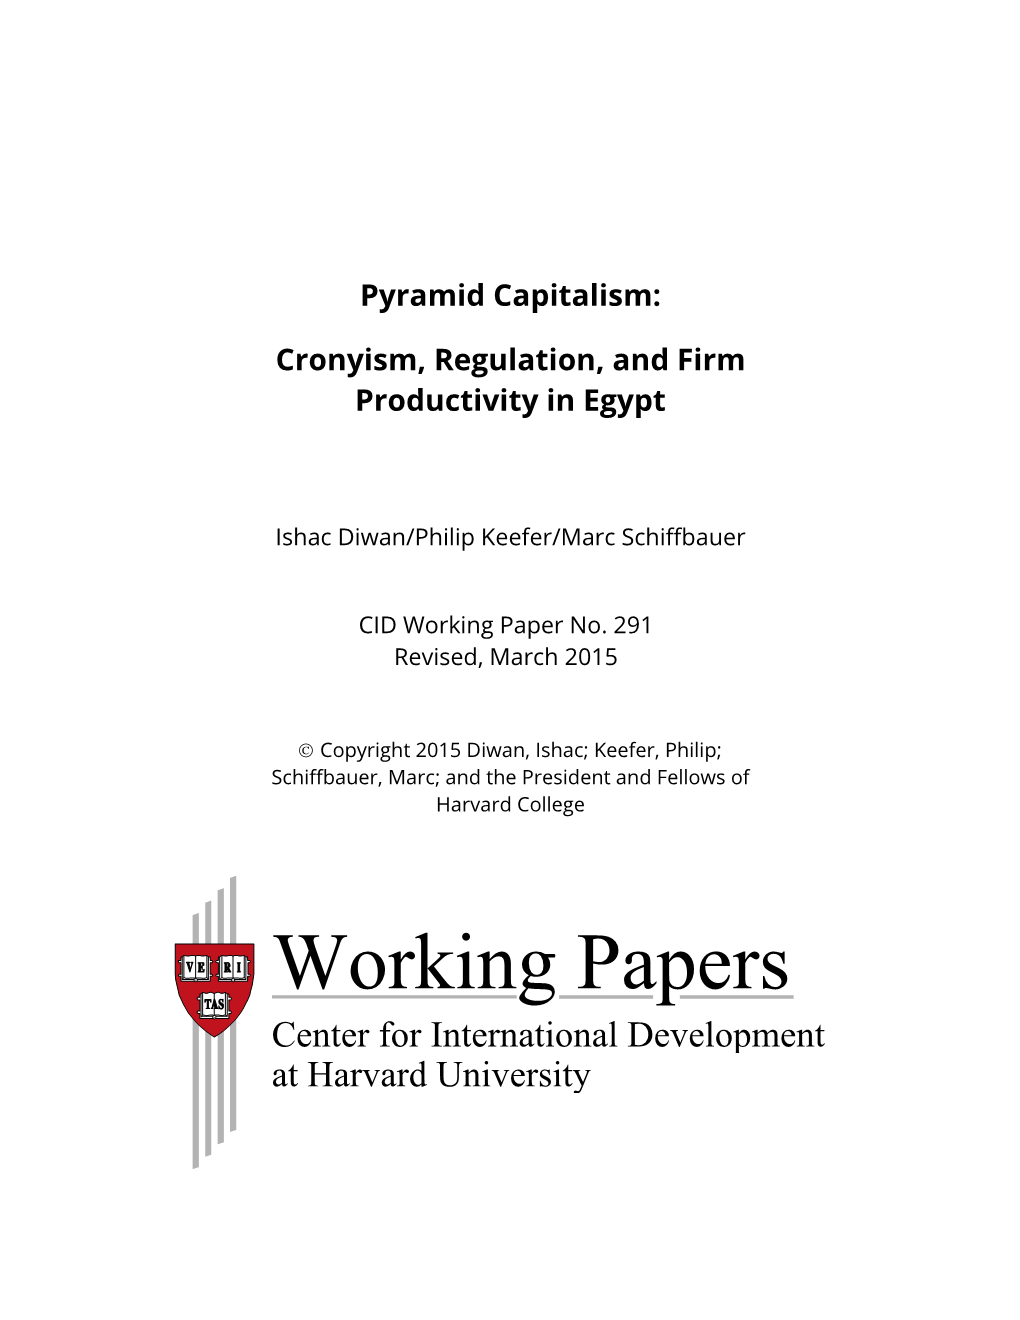 Cronyism, Regulation, and Firm Productivity in Egypt